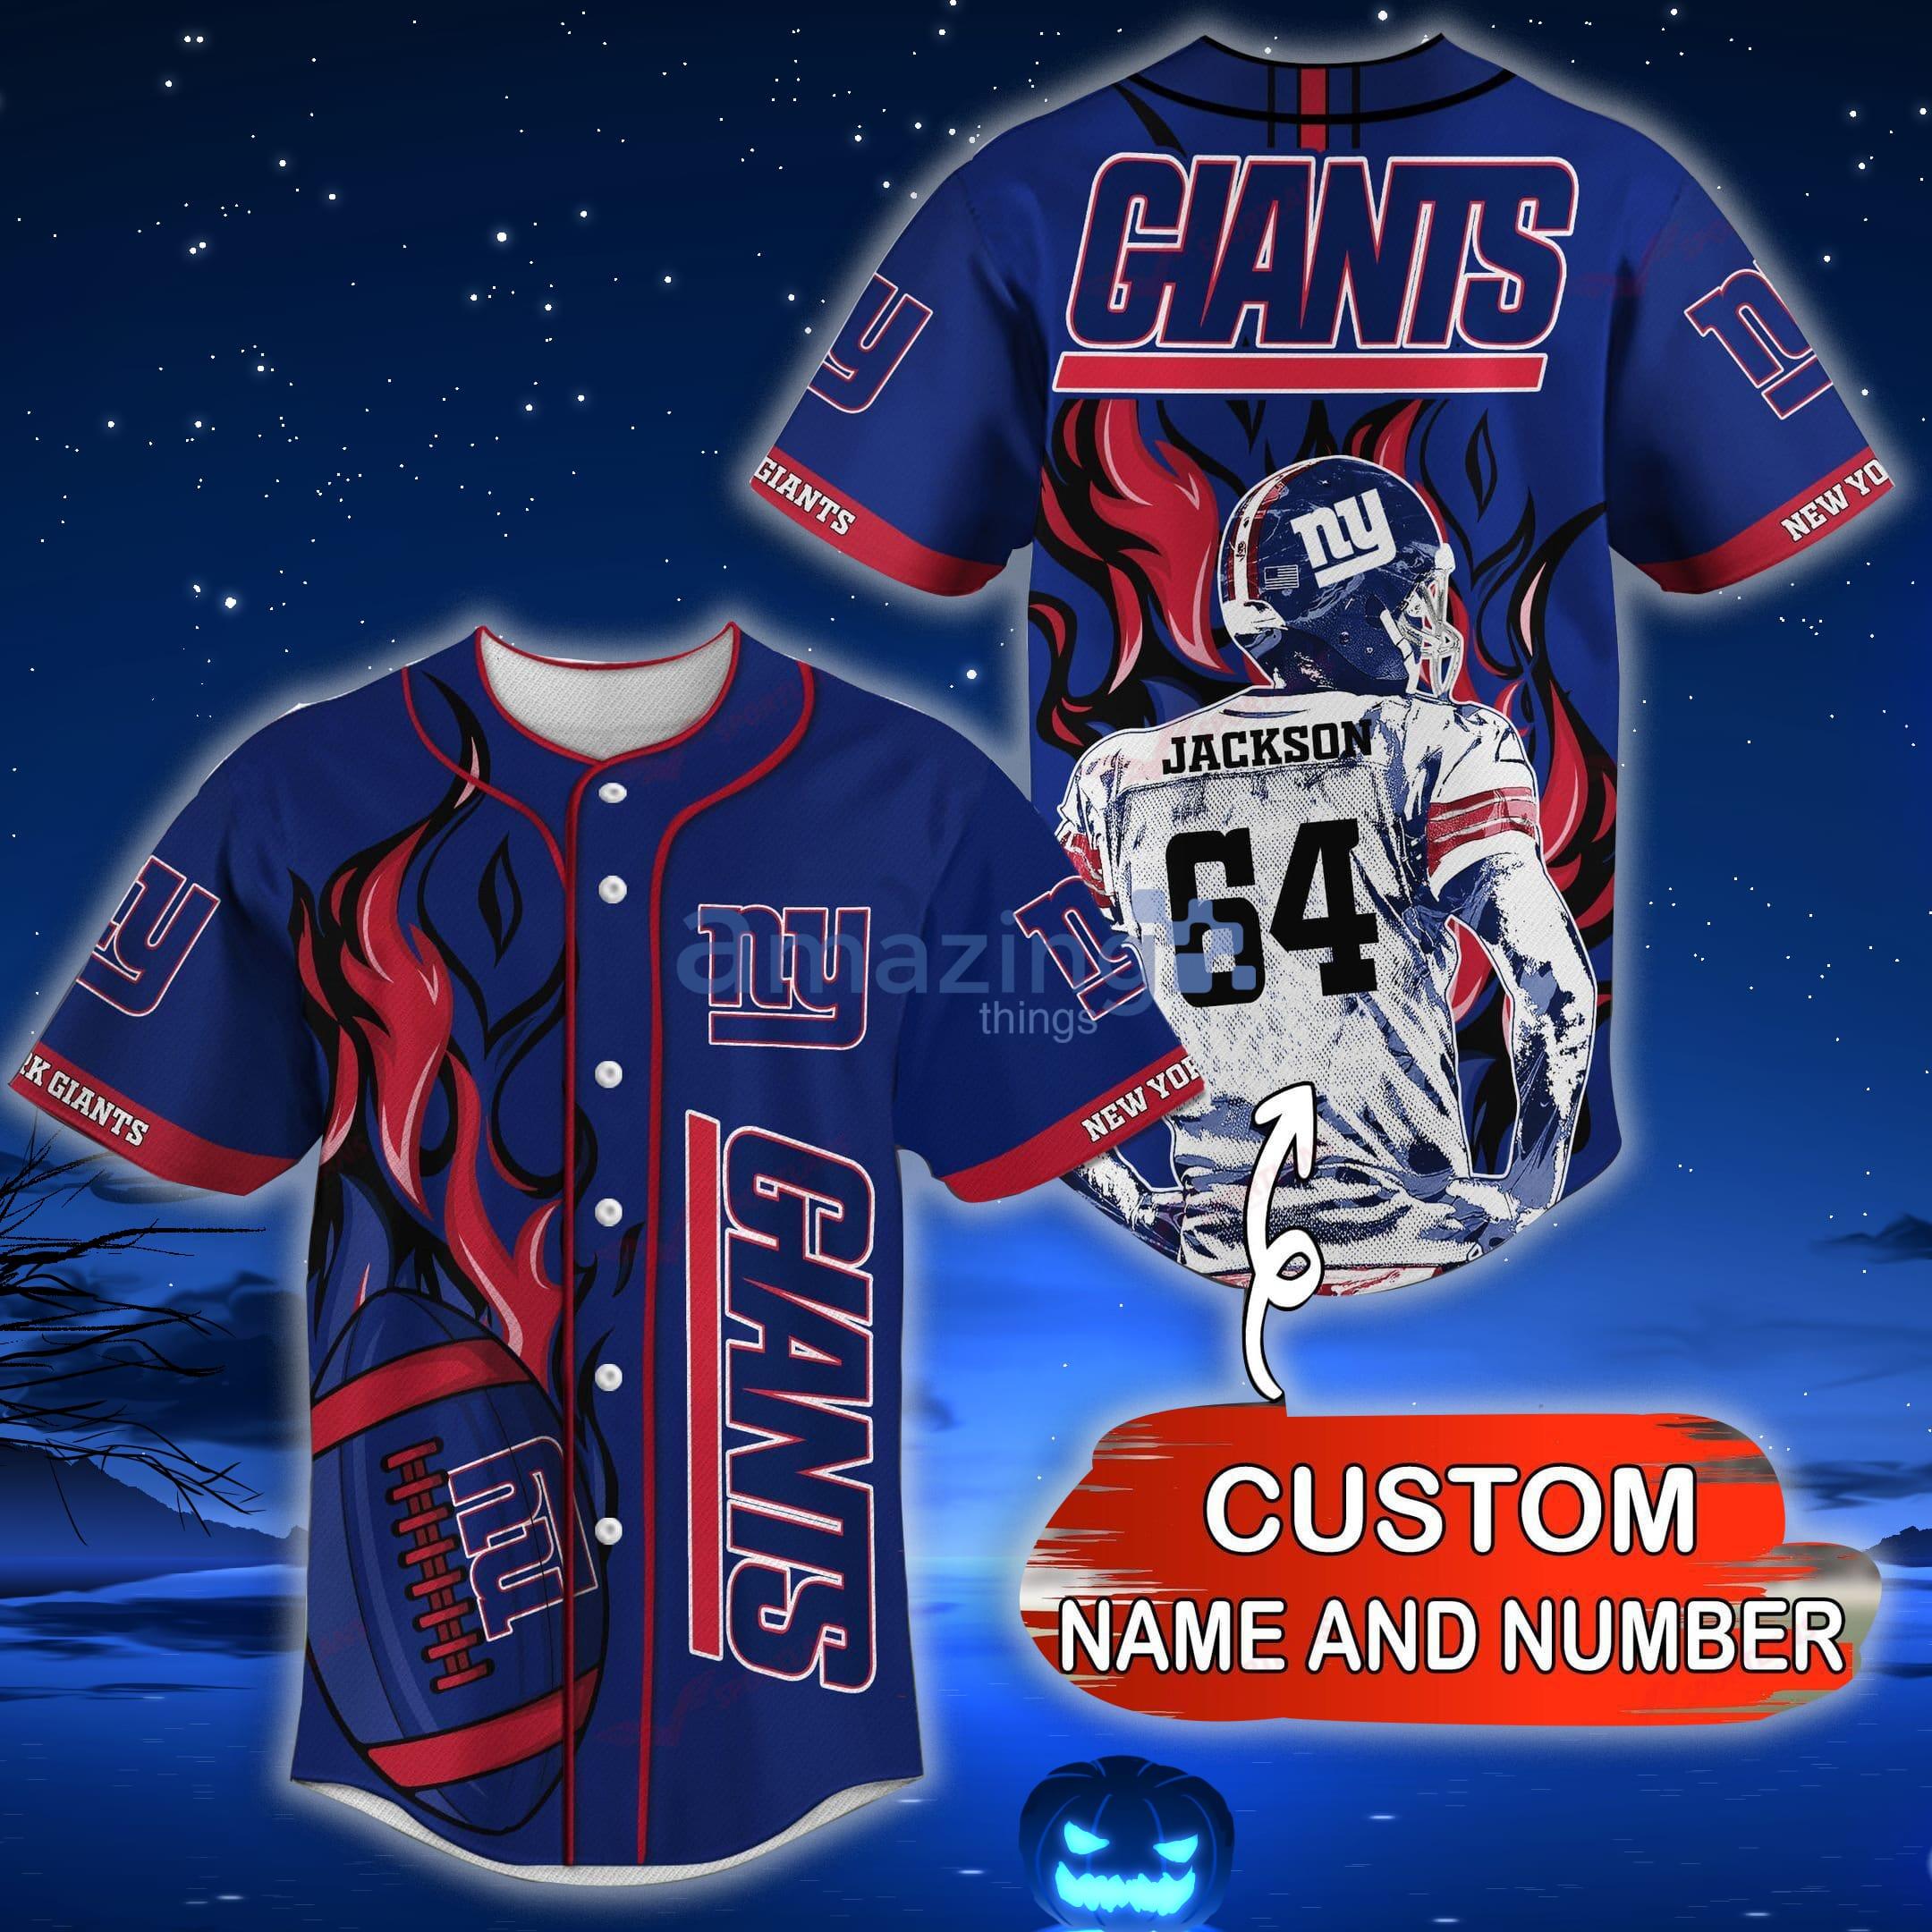 New York Giants NFL Custom Name And Number Baseball Jersey Shirt For Fans